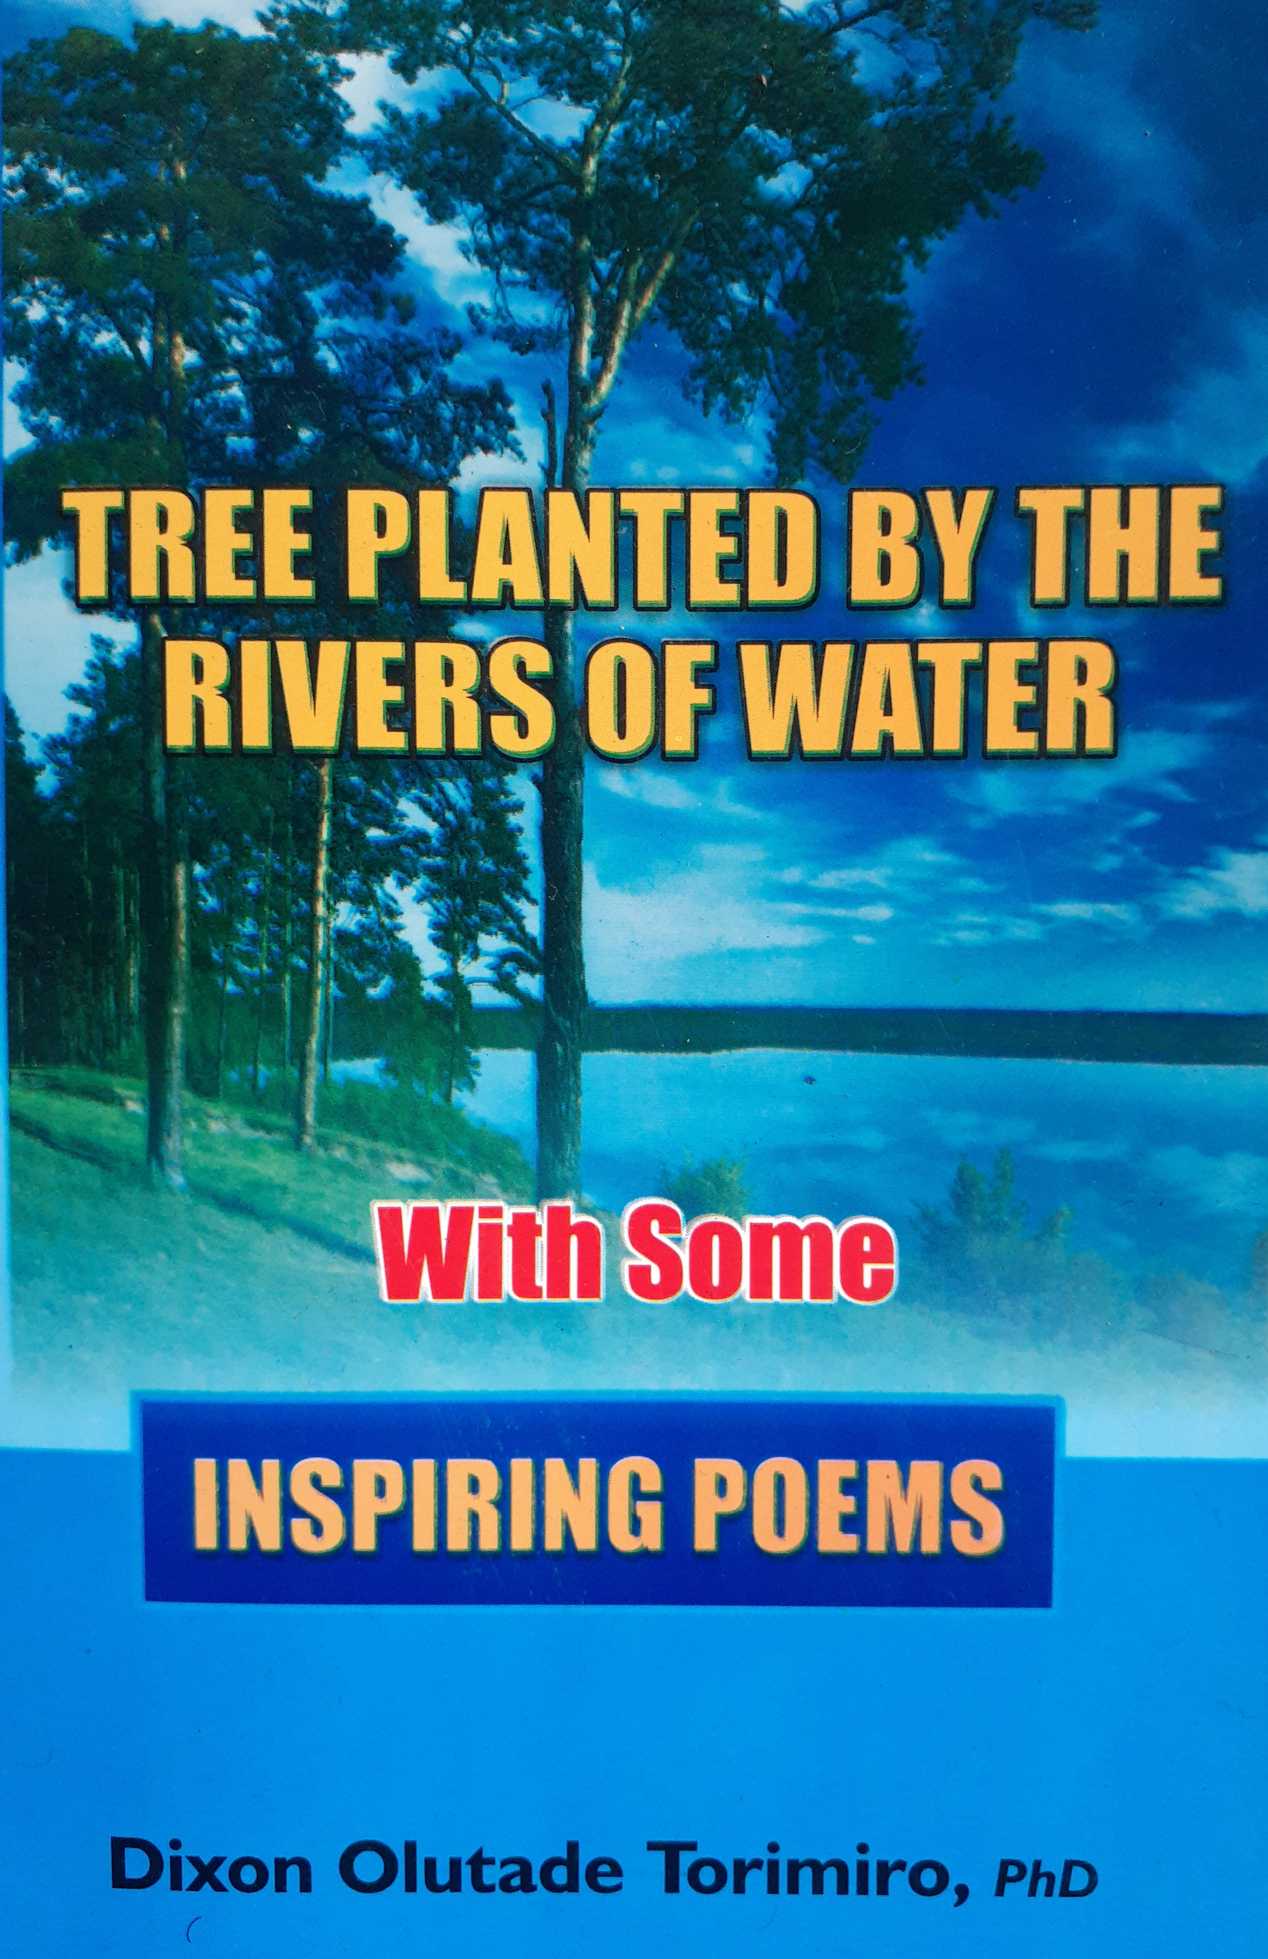 Tree planted by the rivers of water